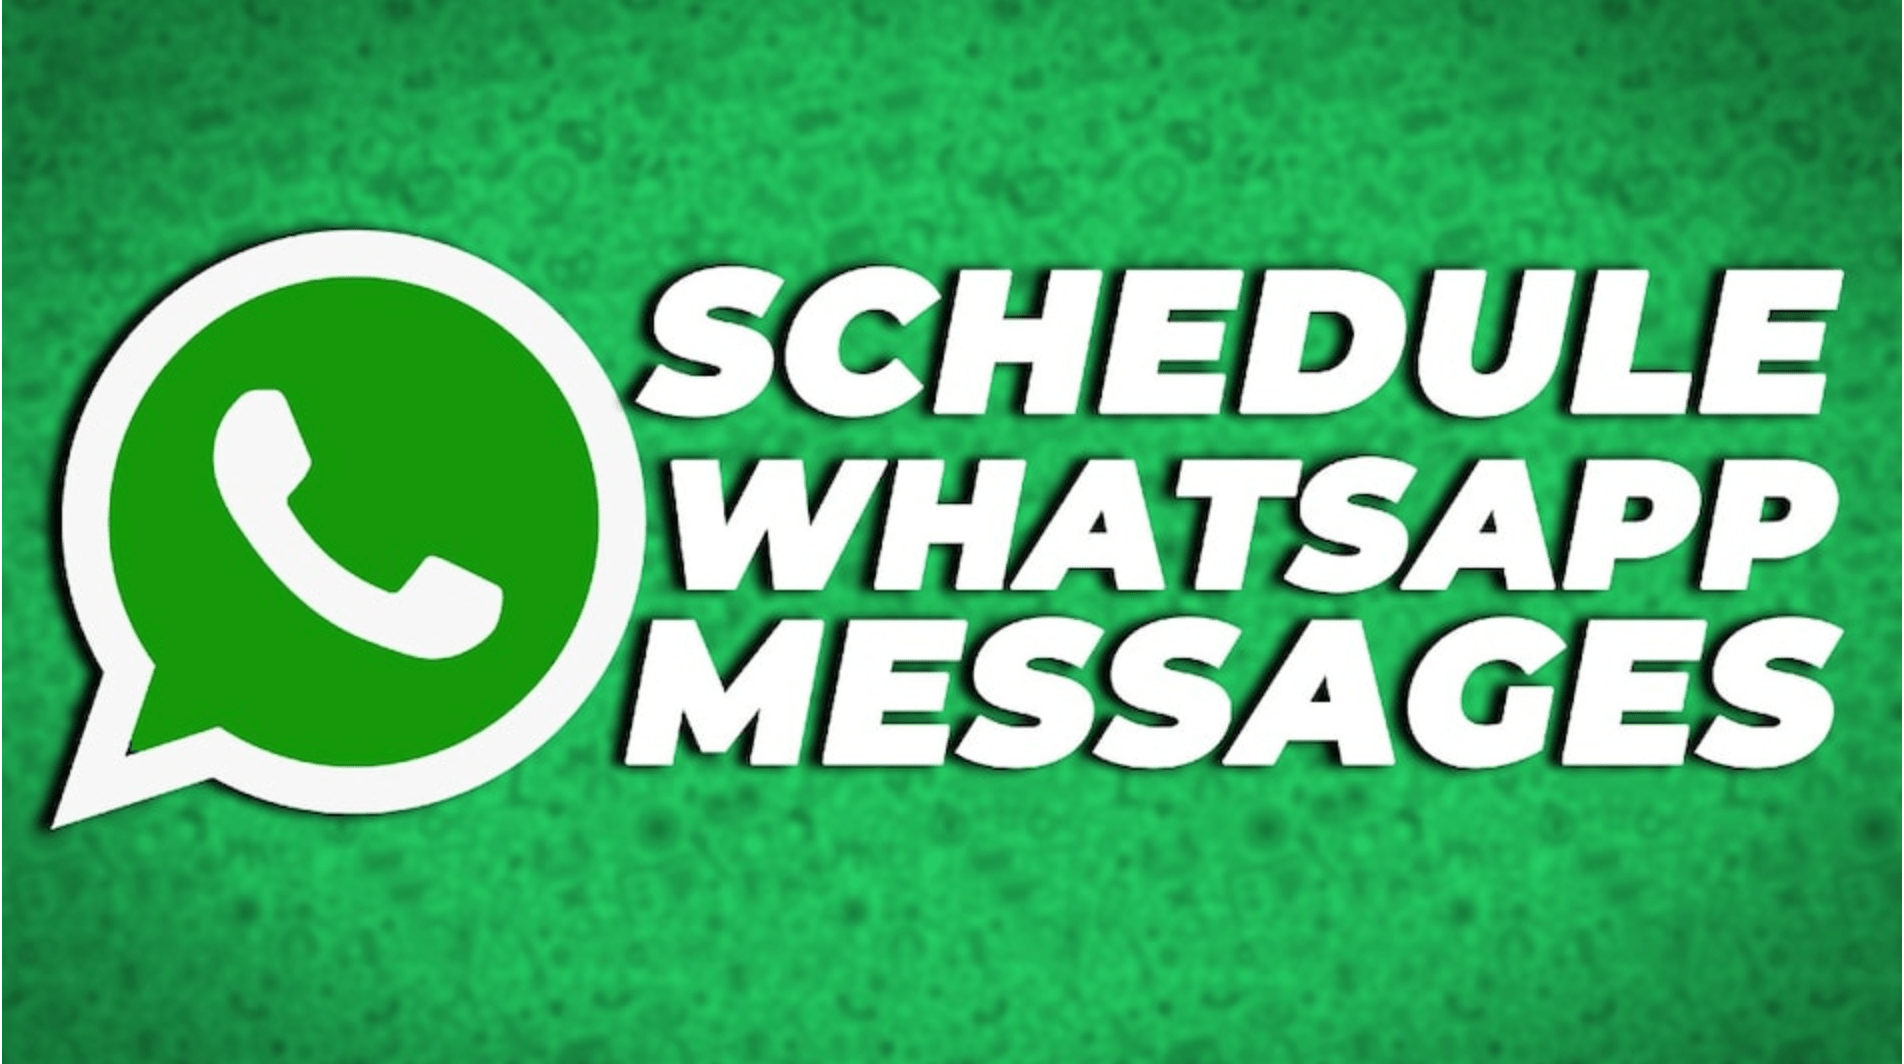 Want To Schedule Whatsapp Messages